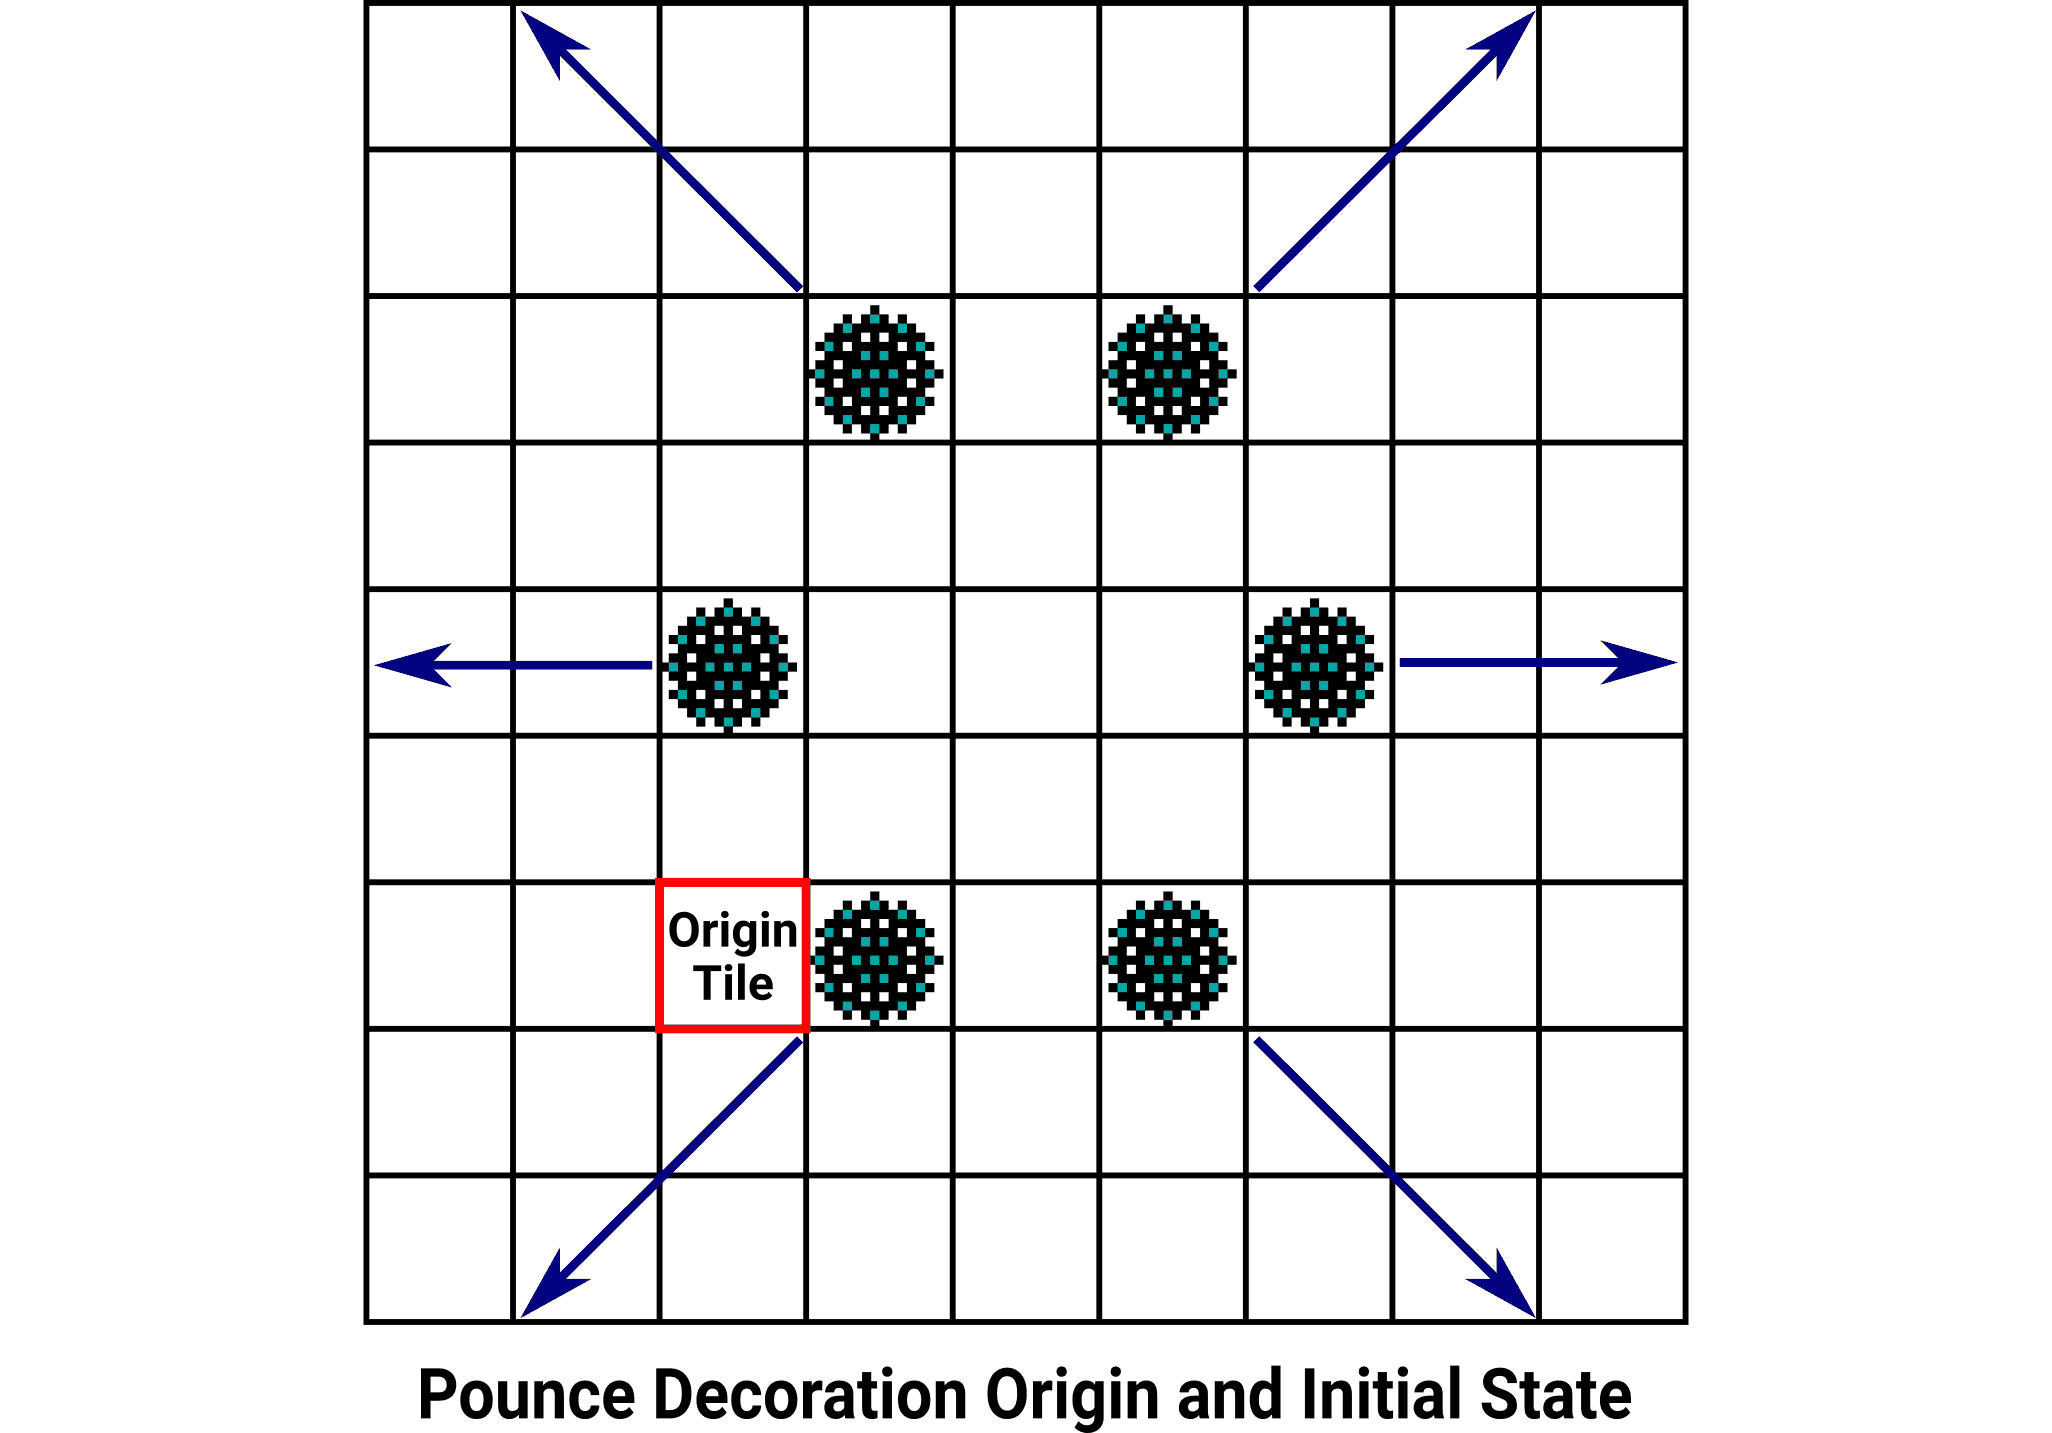 Diagram of the origin and initial position of each element of the pounce decoration.